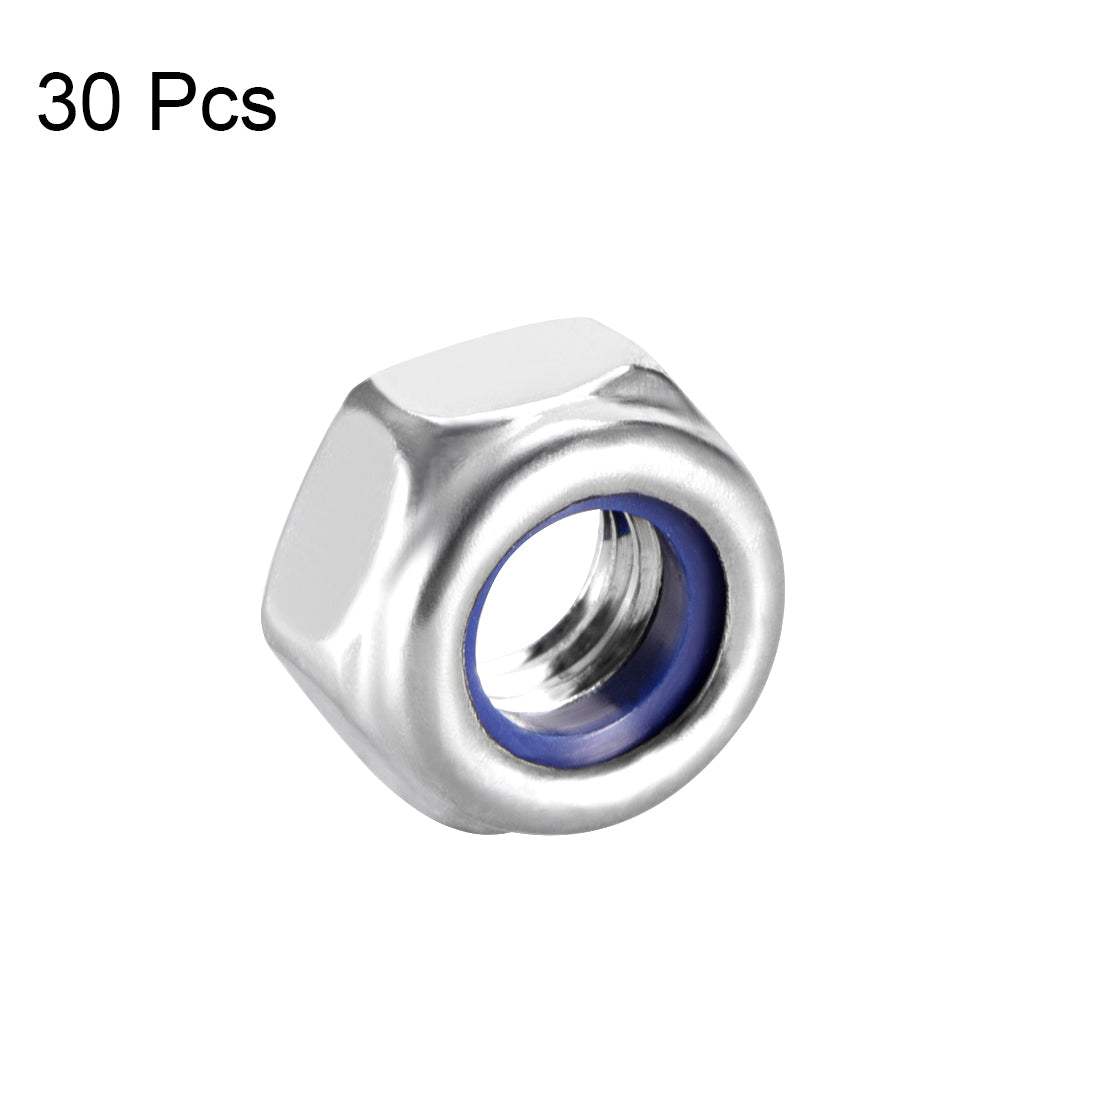 uxcell Uxcell M6 x 1mm Hex Lock Nuts Stainless Steel Nylon Insert Self-Lock Nuts, 30Pcs Silver